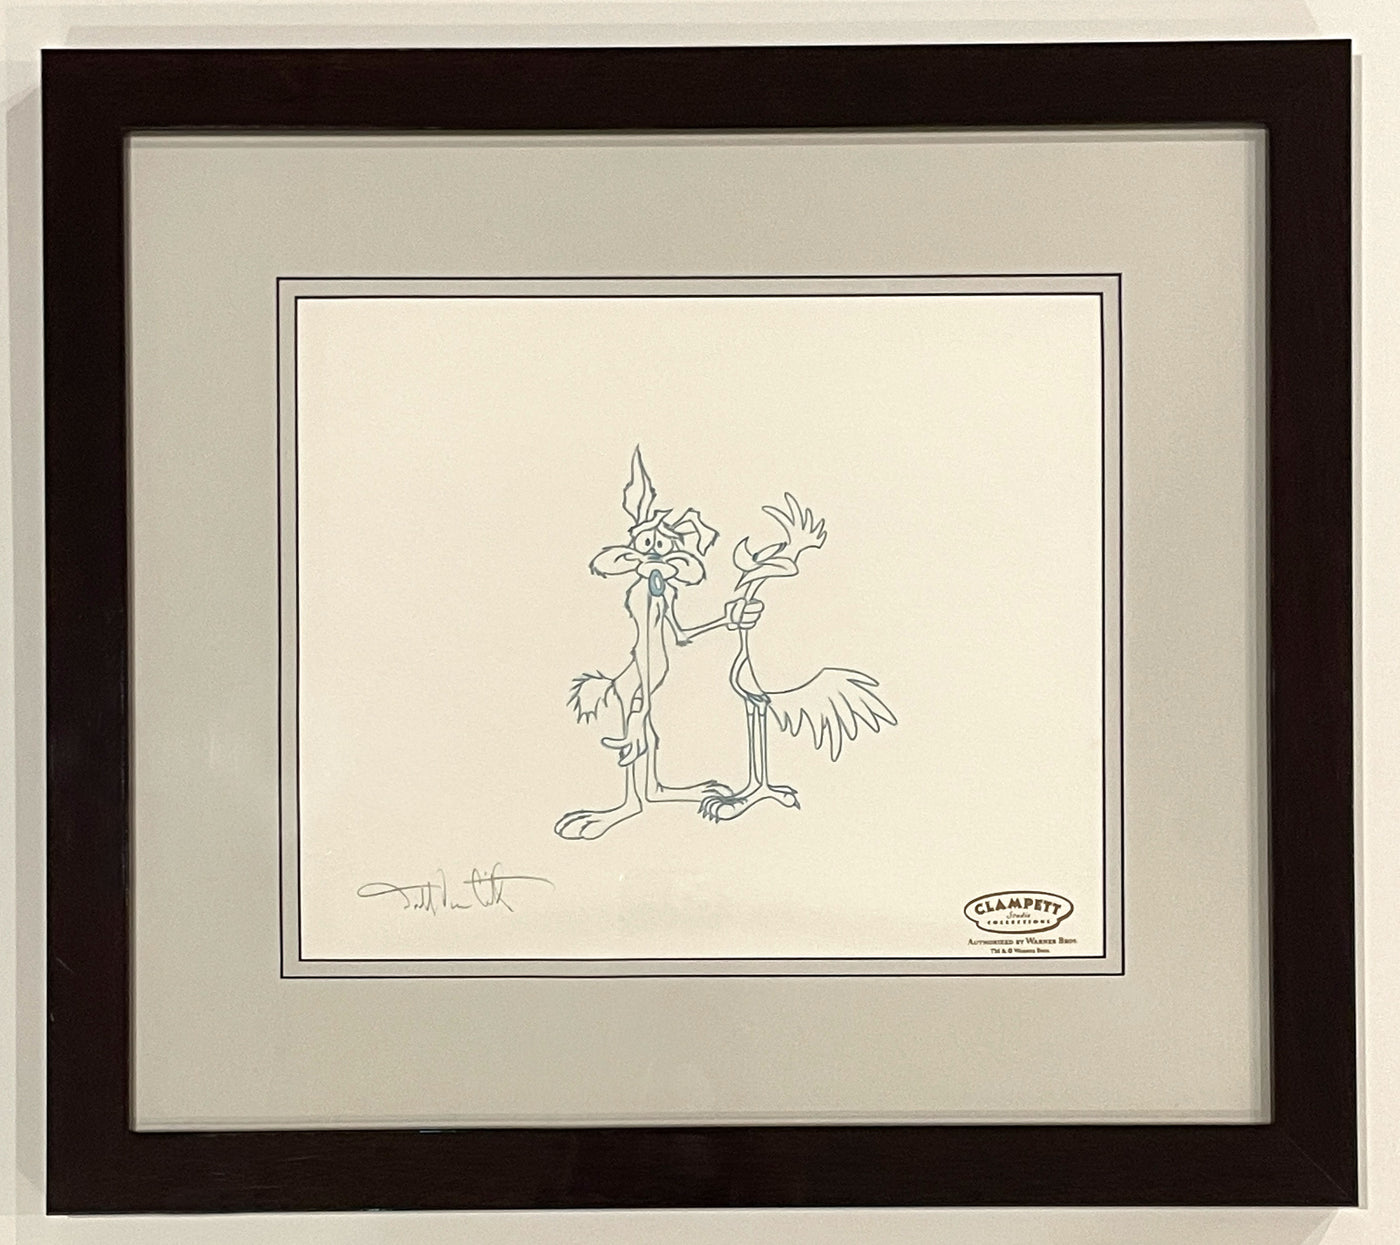 Warner Brothers / Clampett Studios Signed Production Drawing of Wile E. Coyote and Road Runner